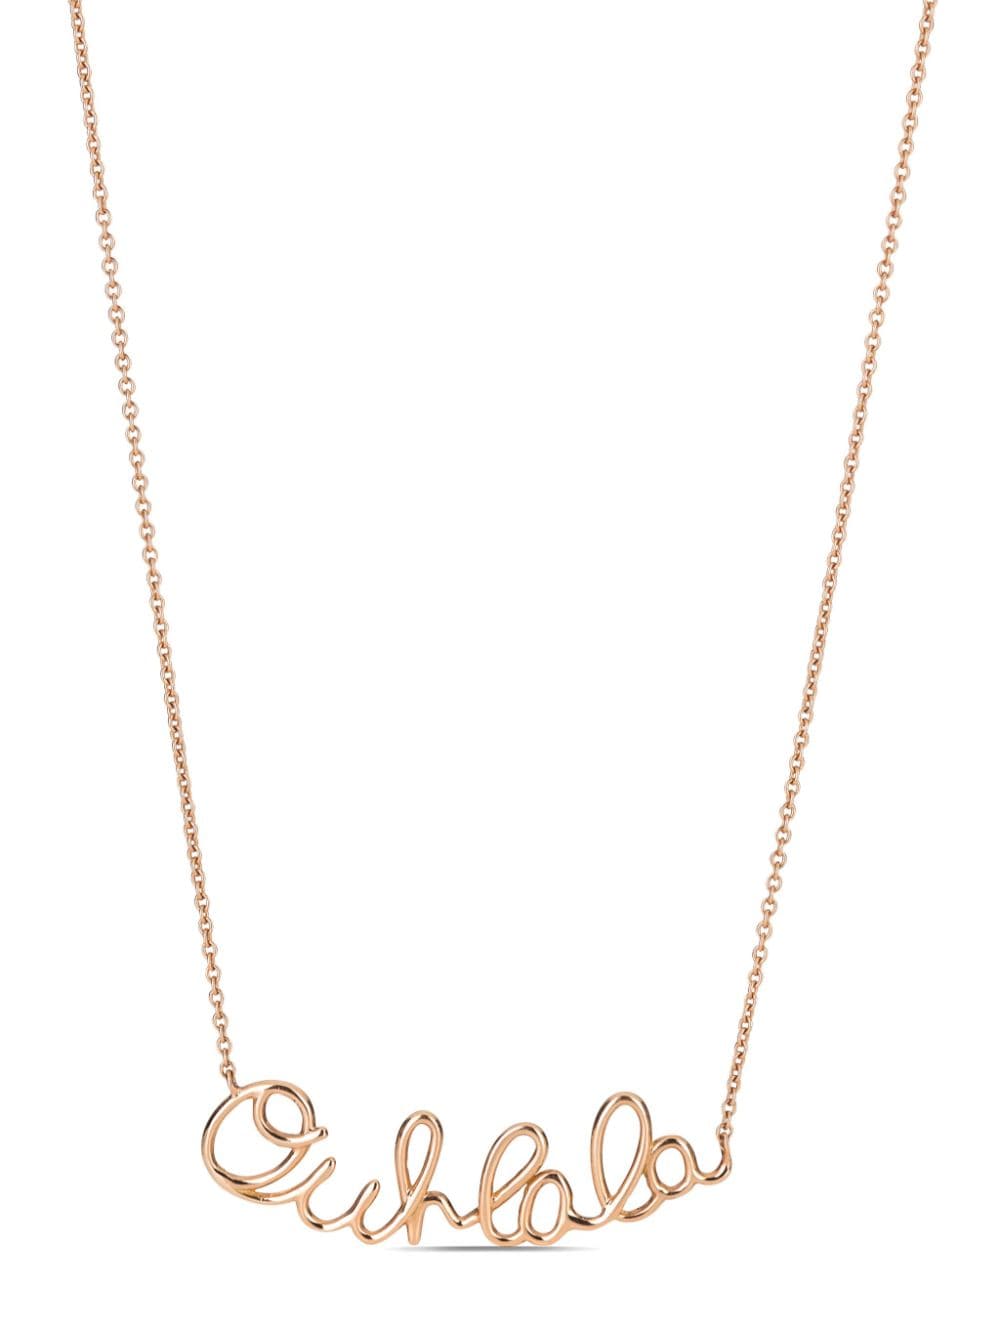 LILY GABRIELLA 18kt rose gold Ouh Lala necklace - Rosa